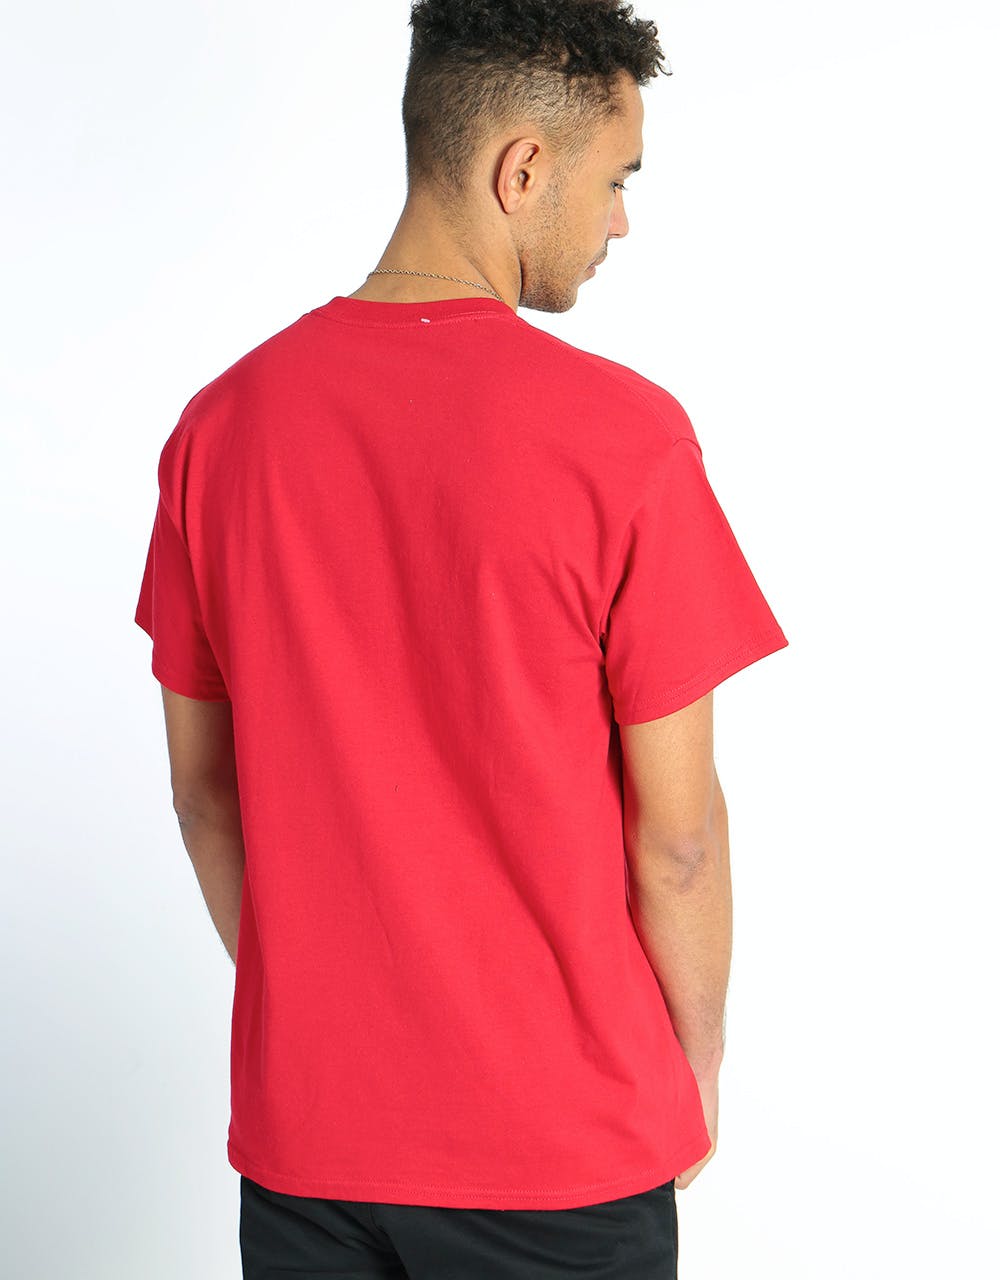 Route One The End T-Shirt - Cherry Red